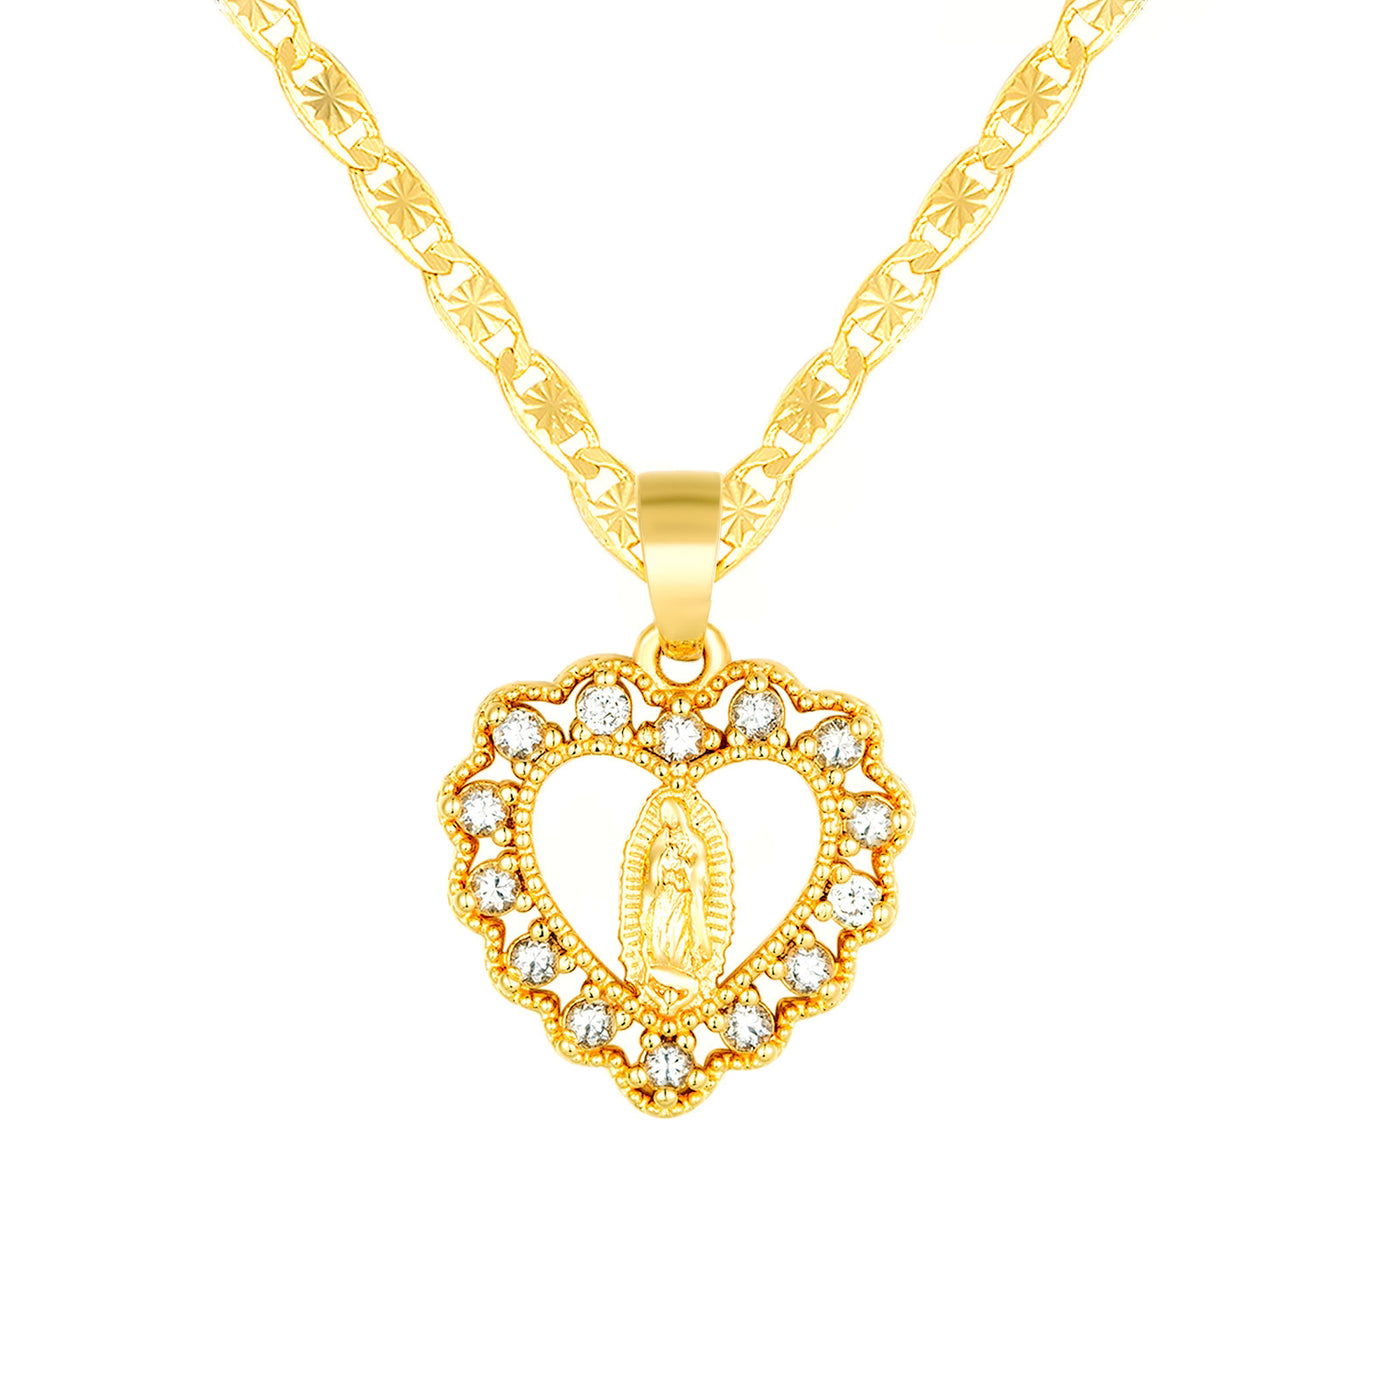 Virgen Mary Mini Heart Necklace 14K Gold Plated - Luxe & Co. Jewelry